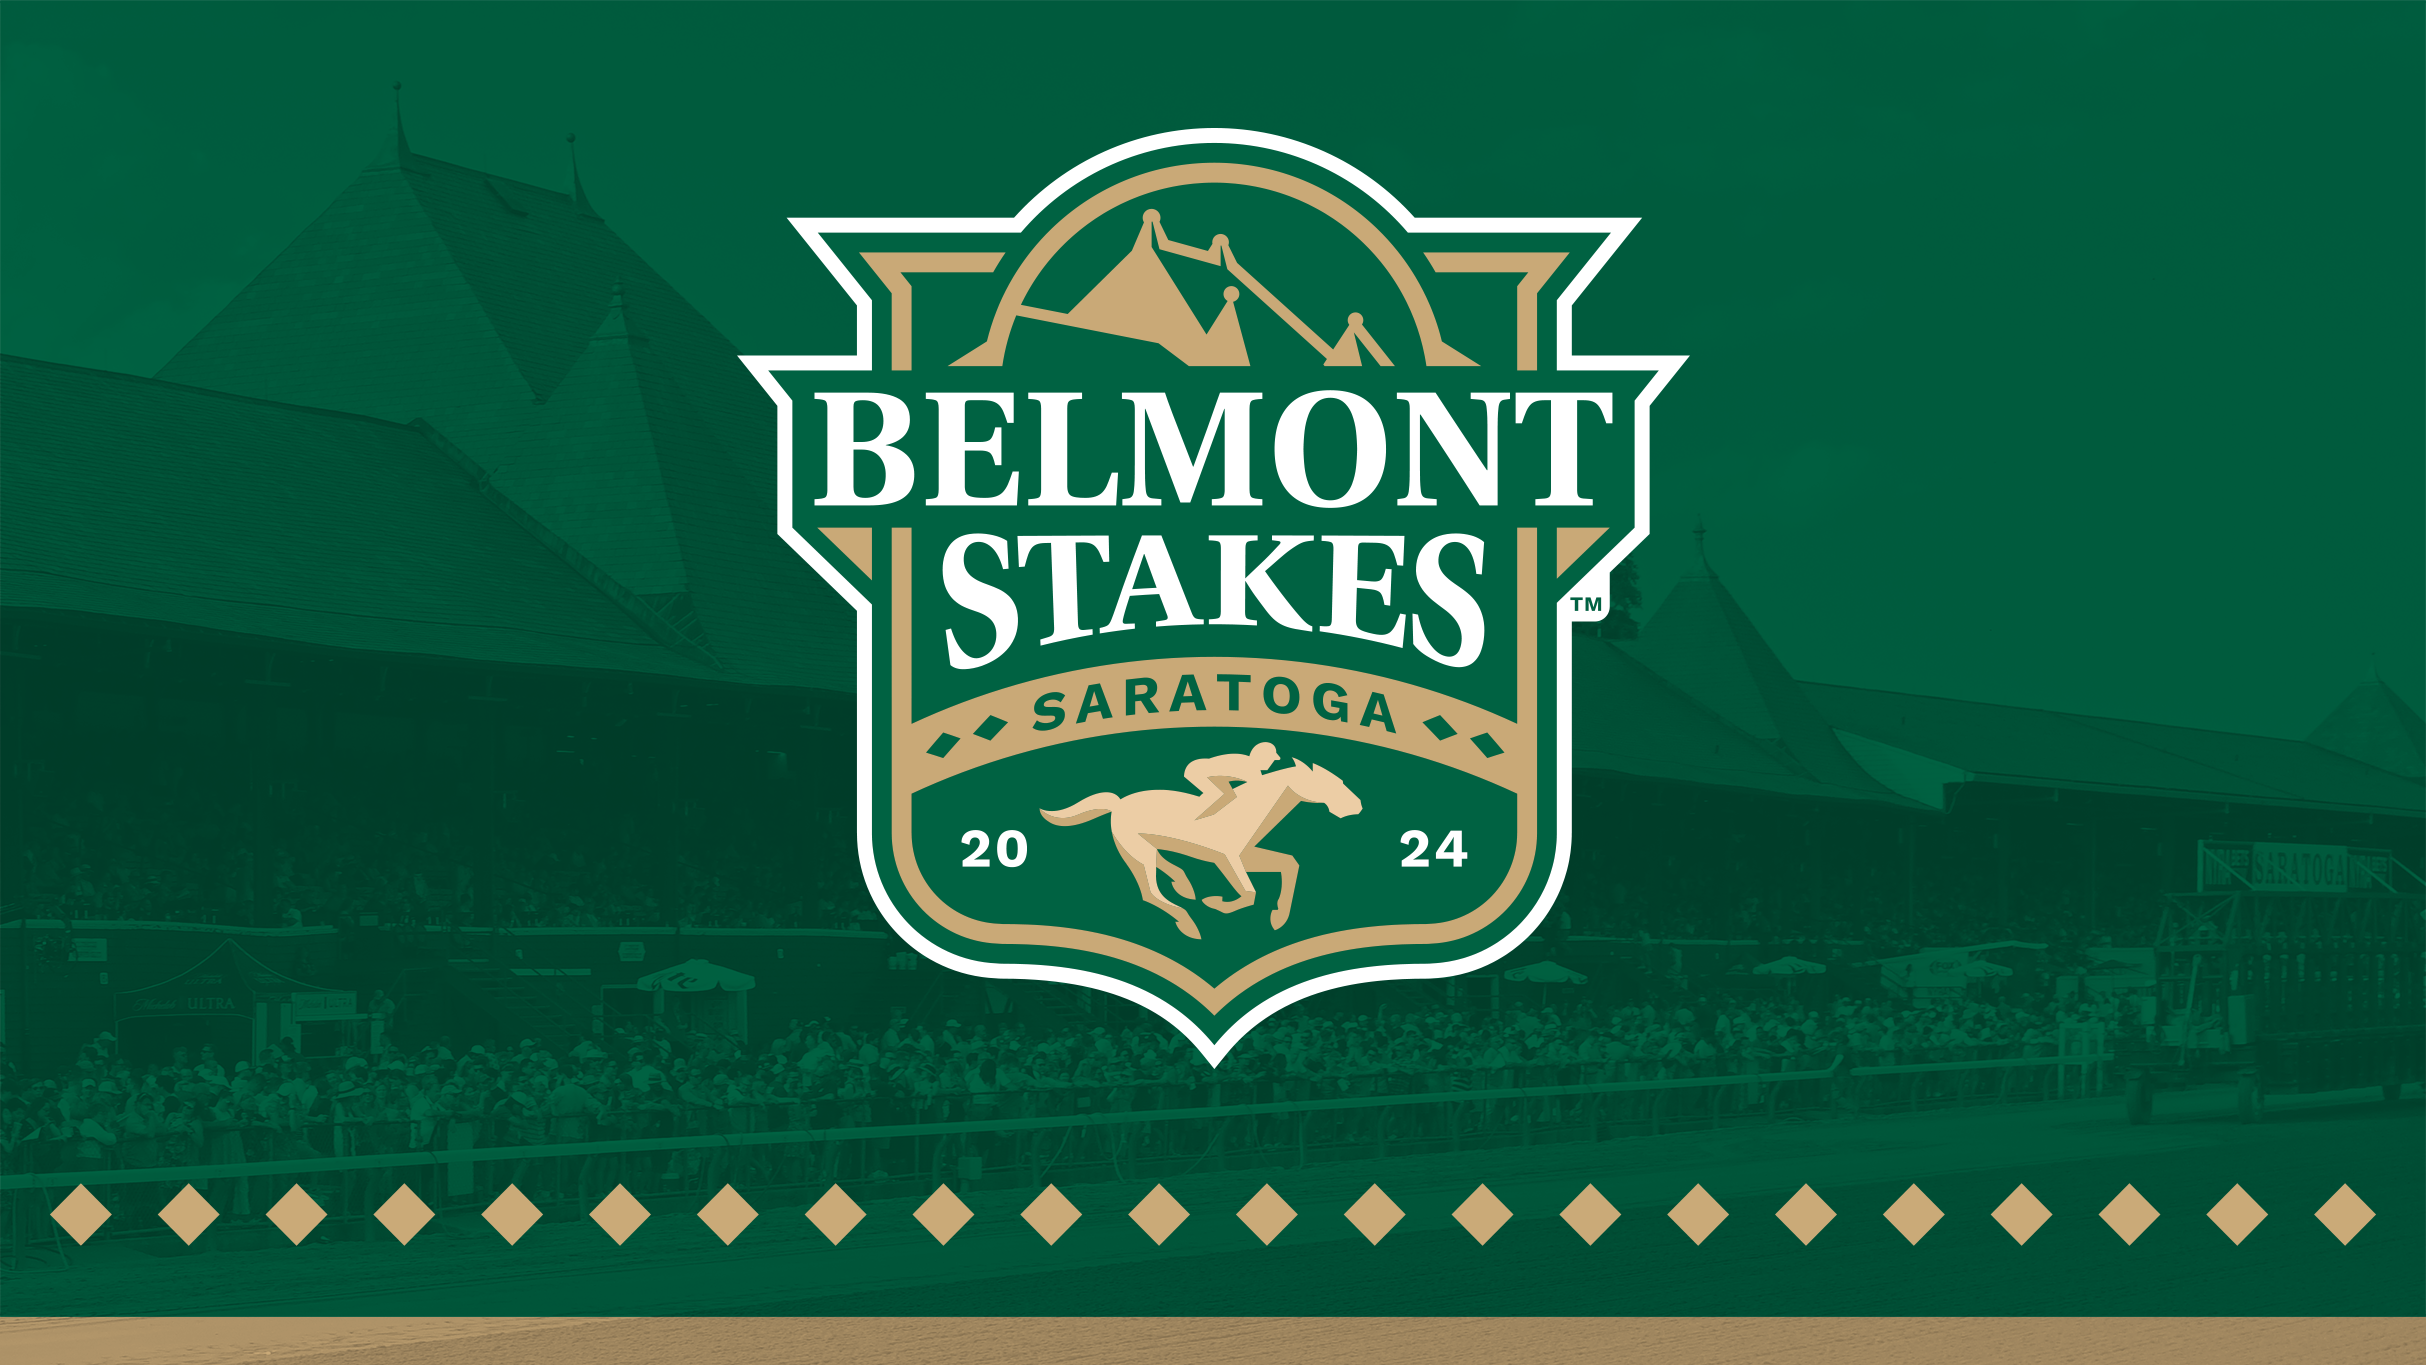 The Belmont Stakes - Reserved Seating presale information on freepresalepasswords.com